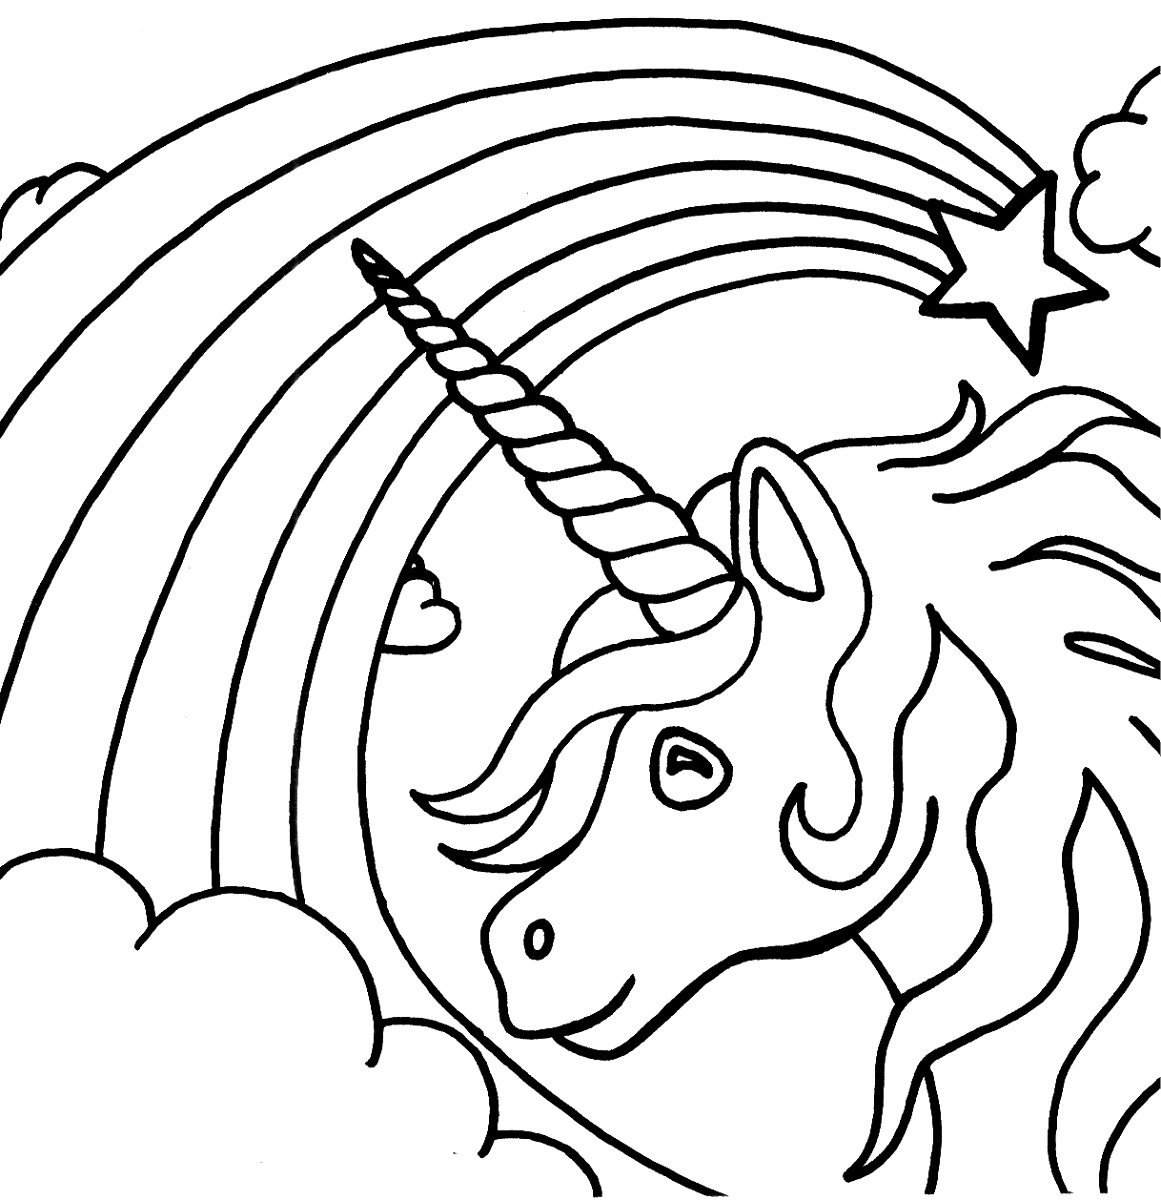 unicorn-rainbow-coloring-pages-at-getcolorings-free-printable-colorings-pages-to-print-and